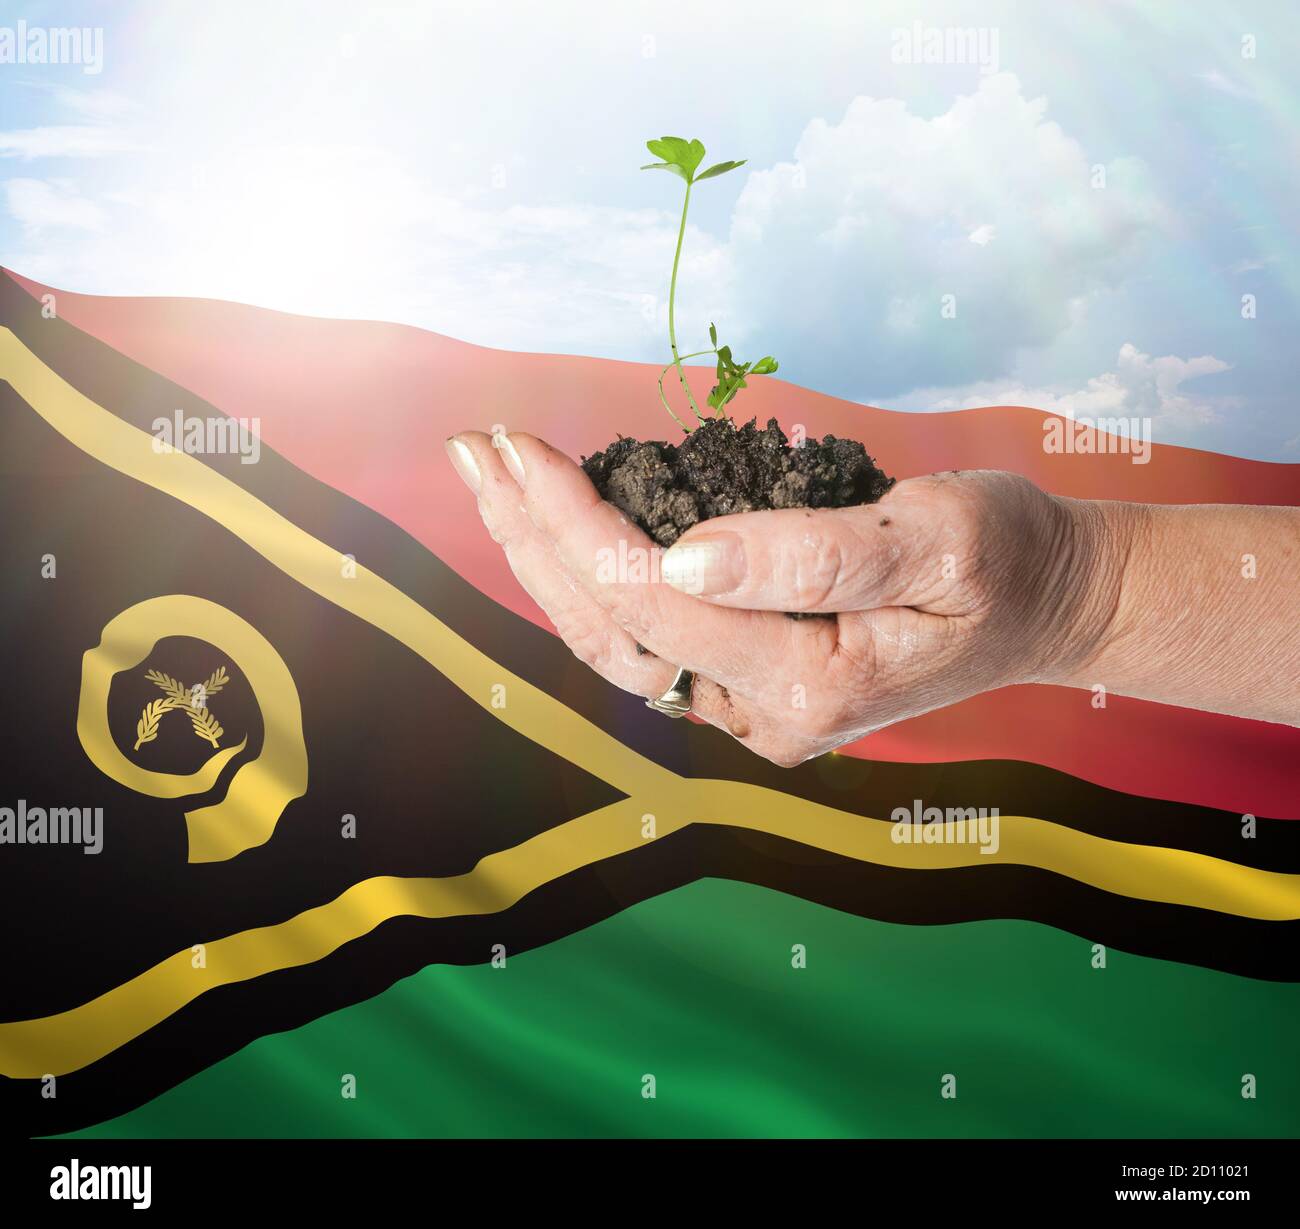 Vanuatu growth and new beginning. Green renewable energy and ecology concept. Hand holding young plant. Stock Photo